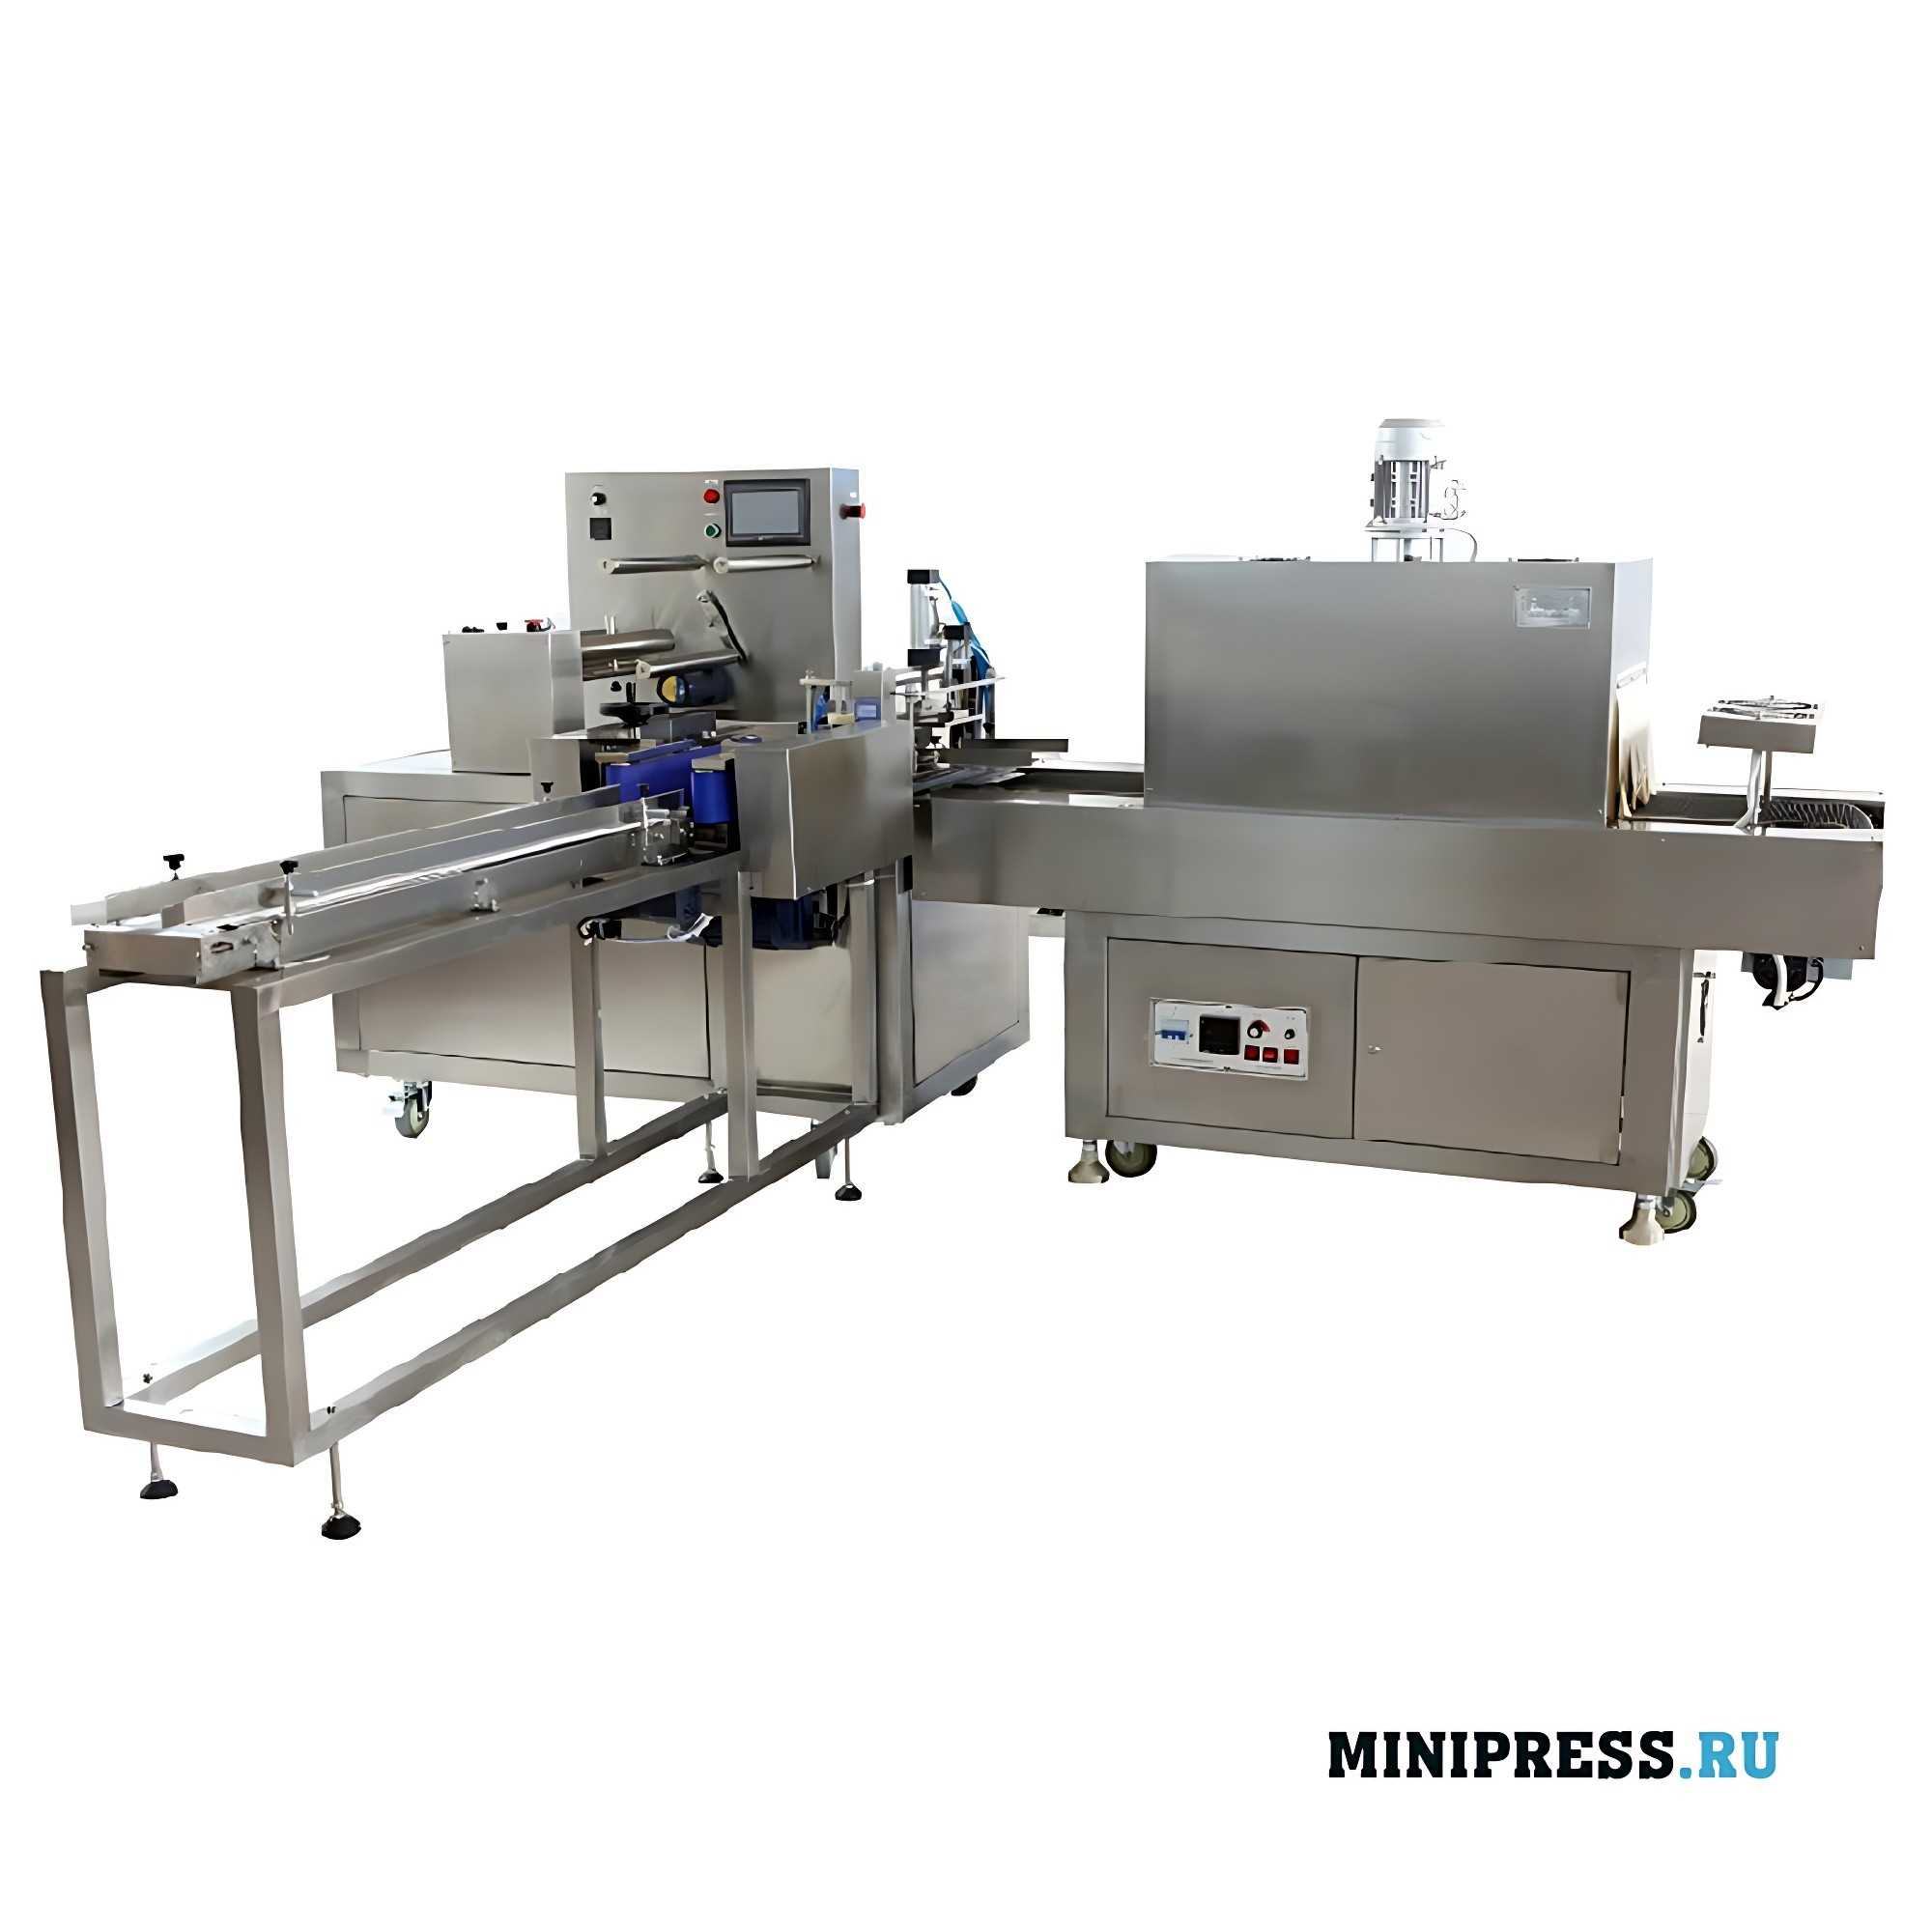 High-speed equipment for packaging in shrink wrap with sealing and trimming BSP 15